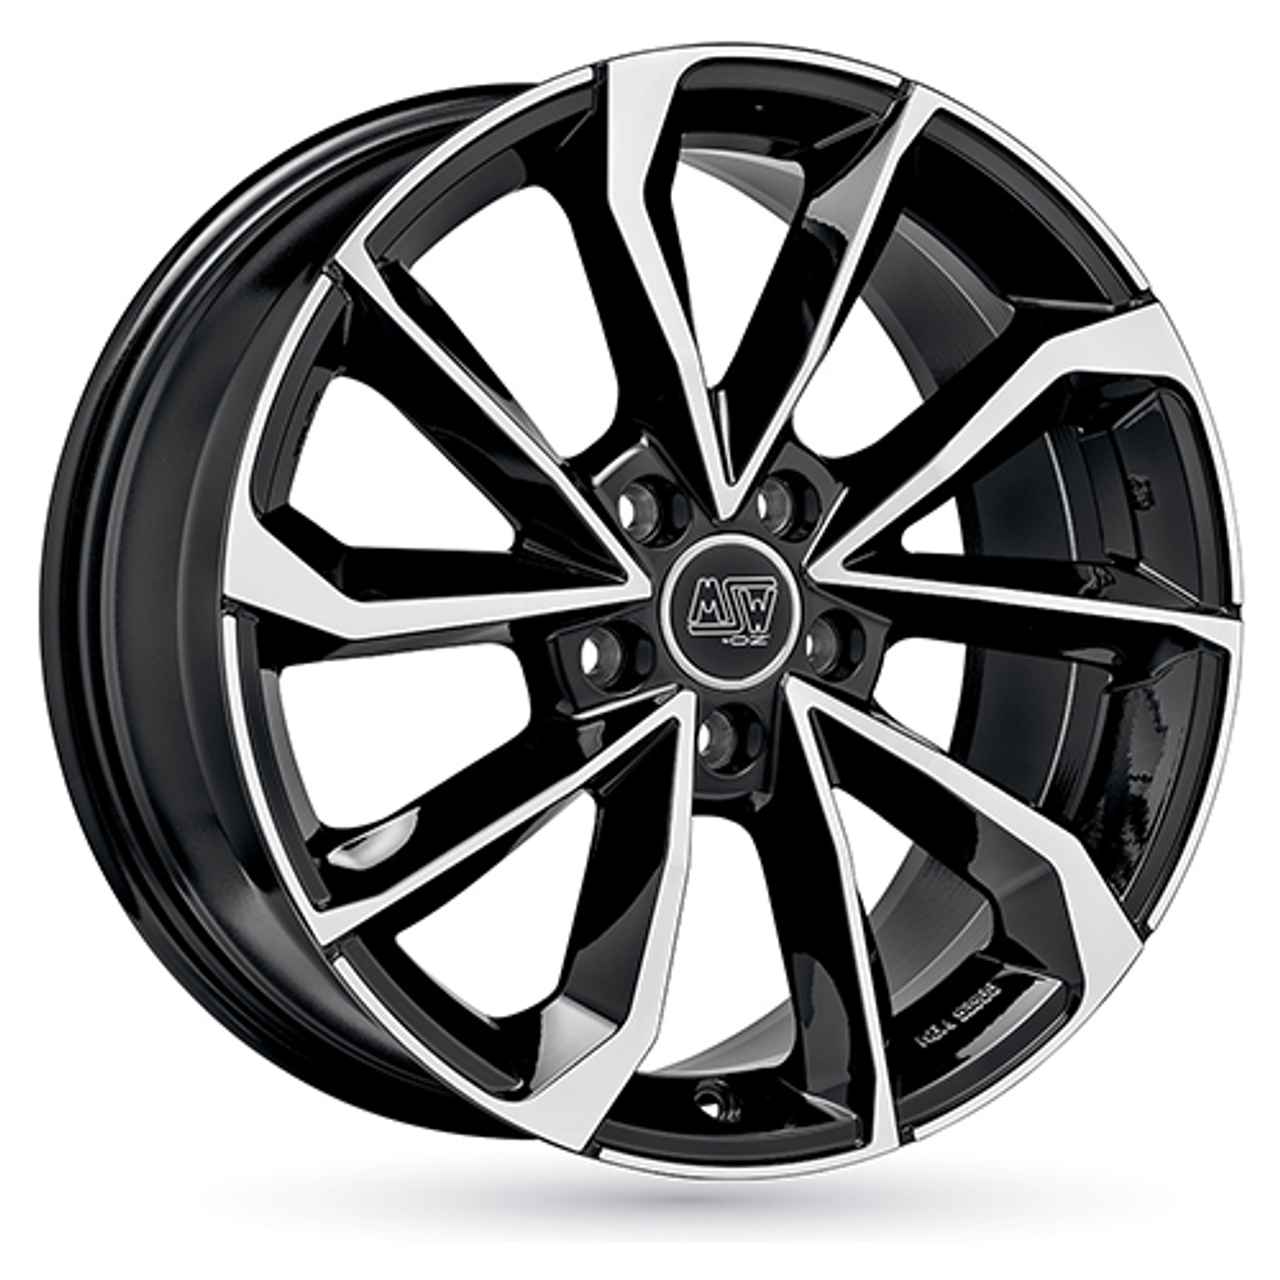 MSW (OZ) MSW 42 gloss black full polished 8.0Jx19 5x112 ET49